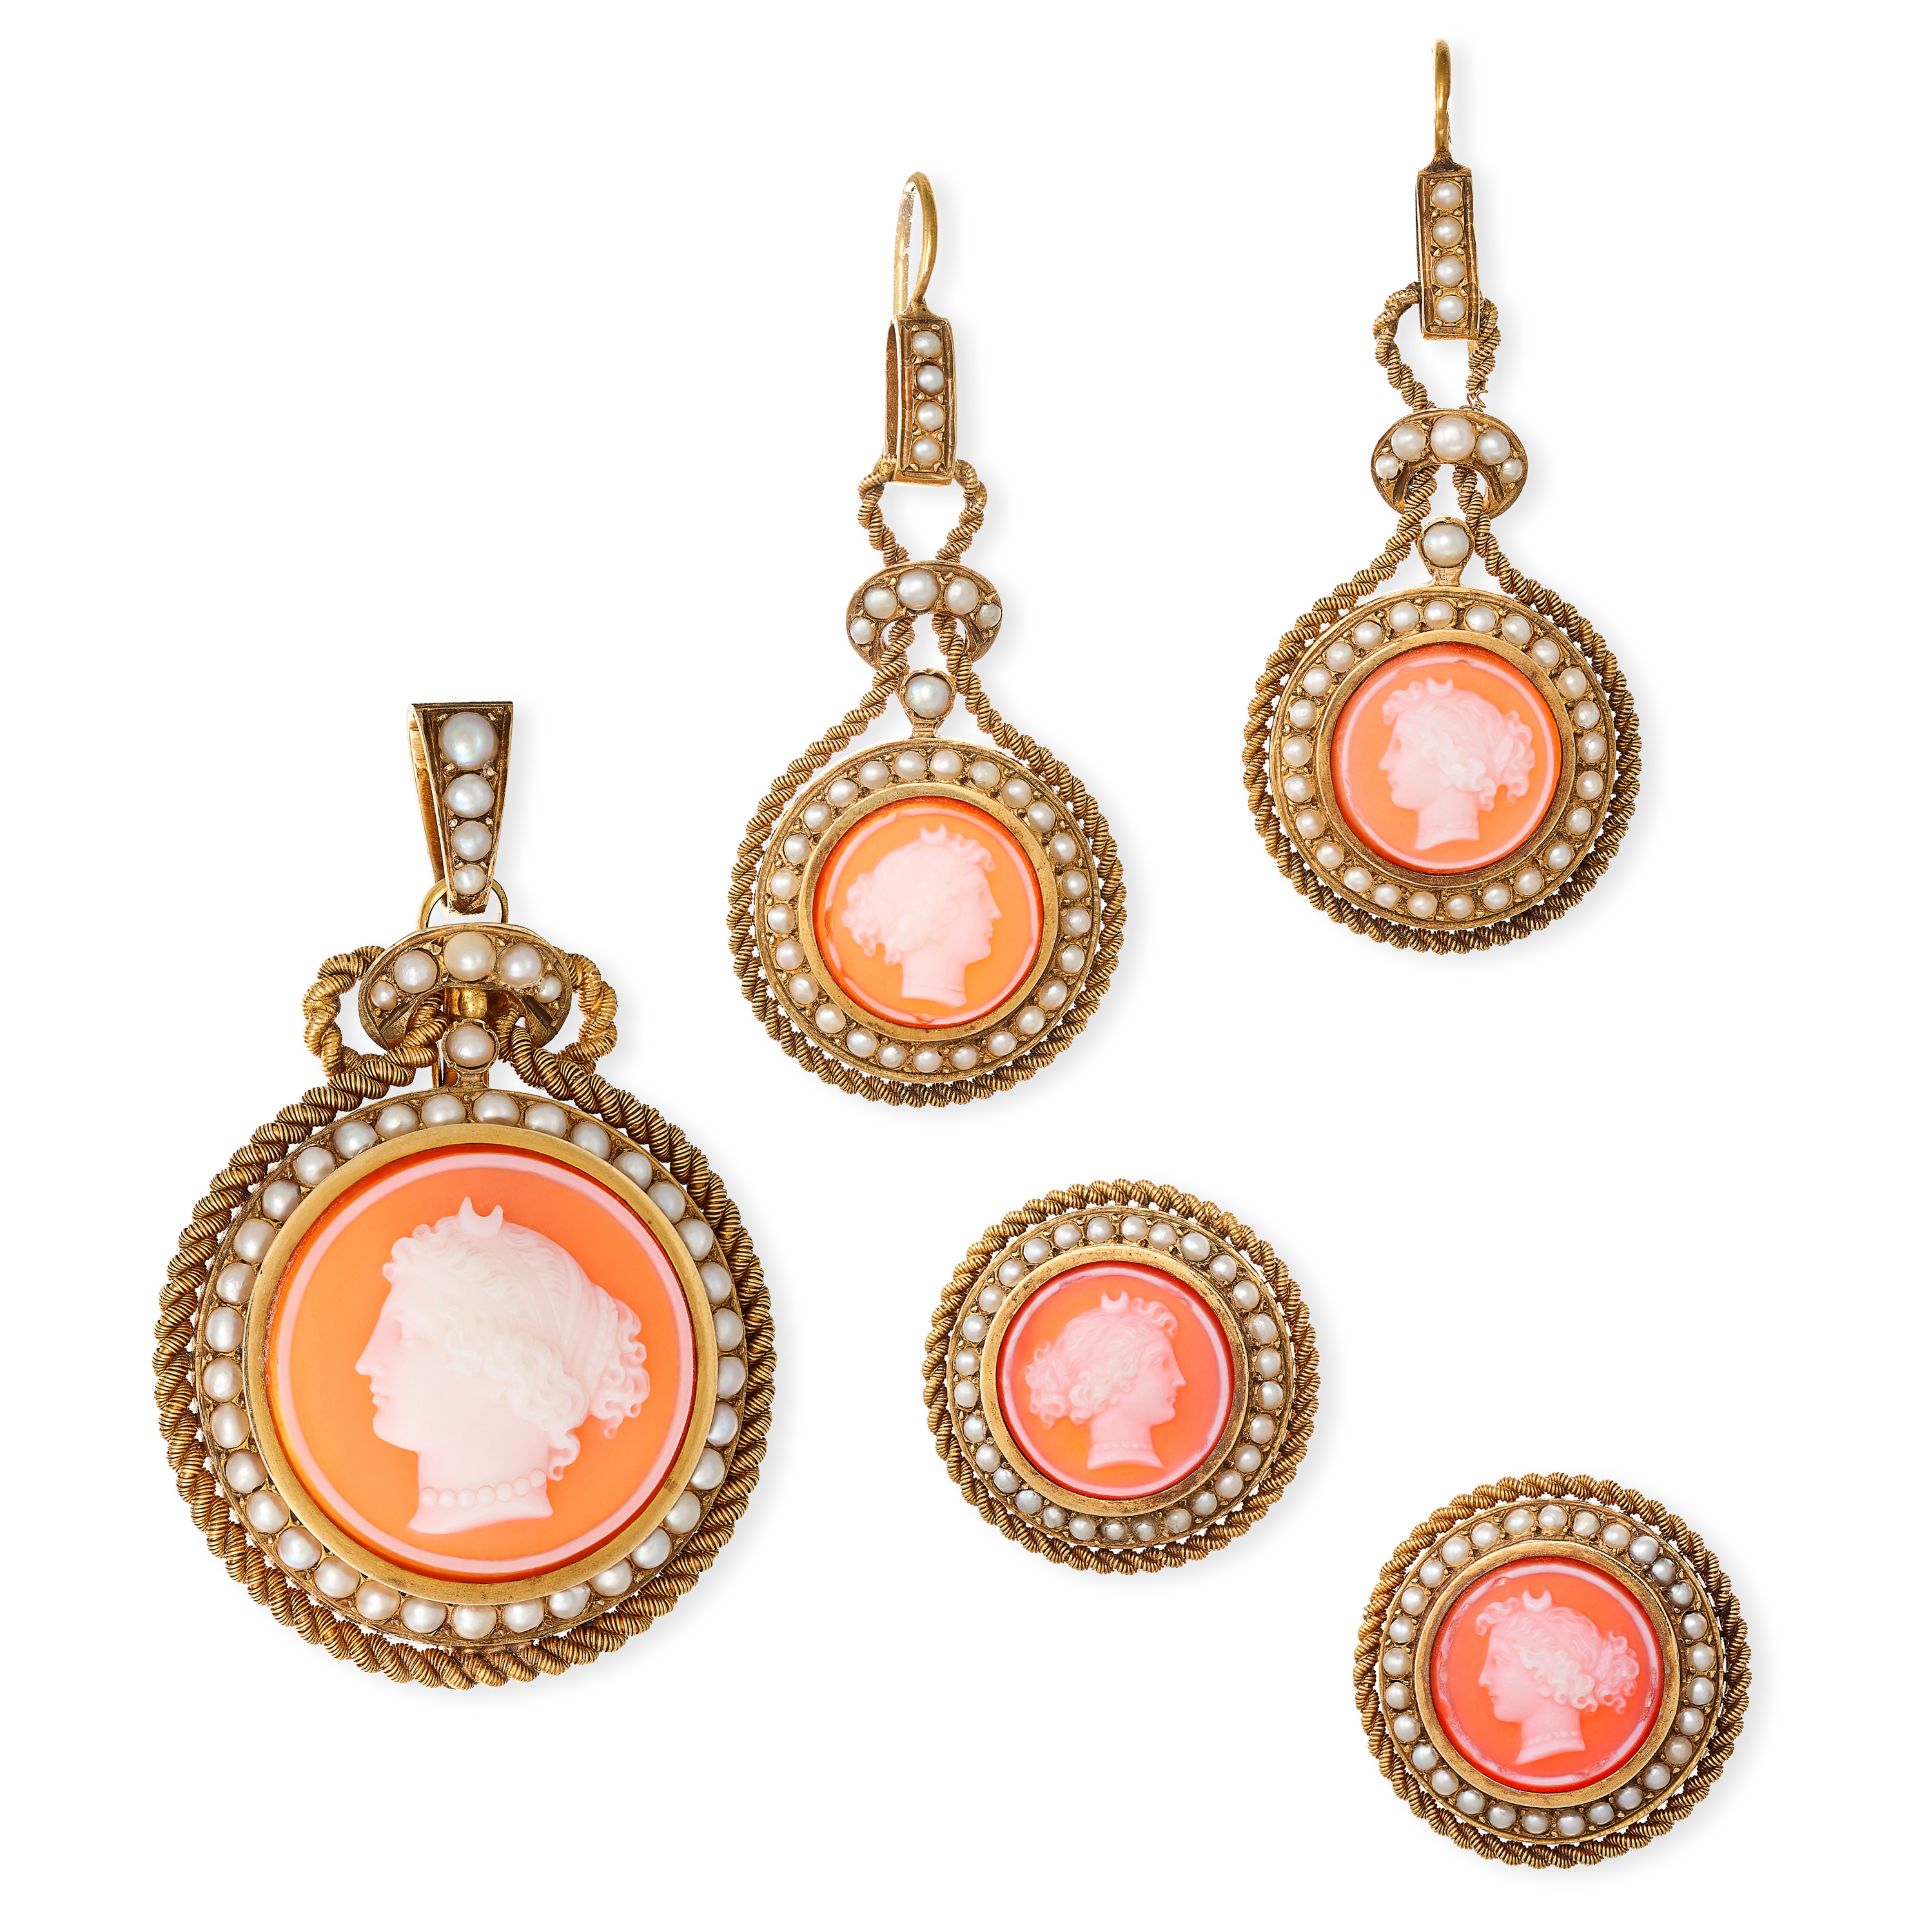 AN ANTIQUE FRENCH CAMEO SUITE in 18ct yellow gold, comprising a pendant / brooch, earrings, and t...